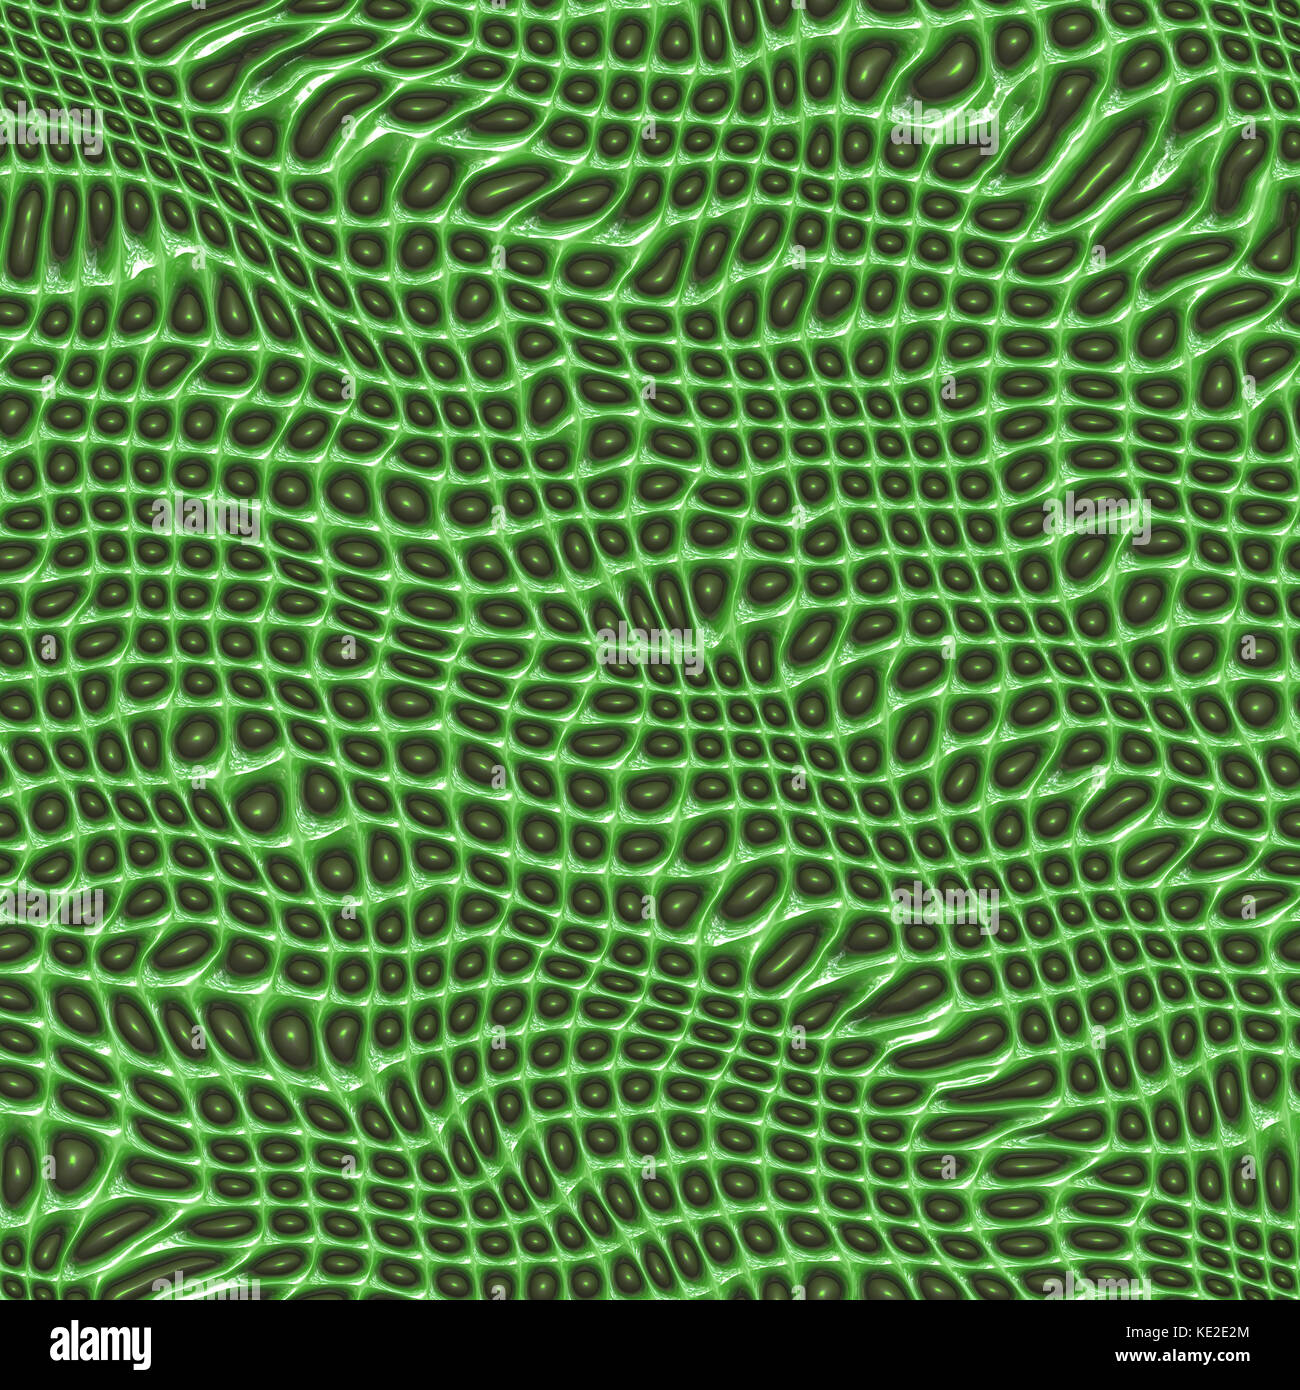 Reptile pattern for background Stock Photo